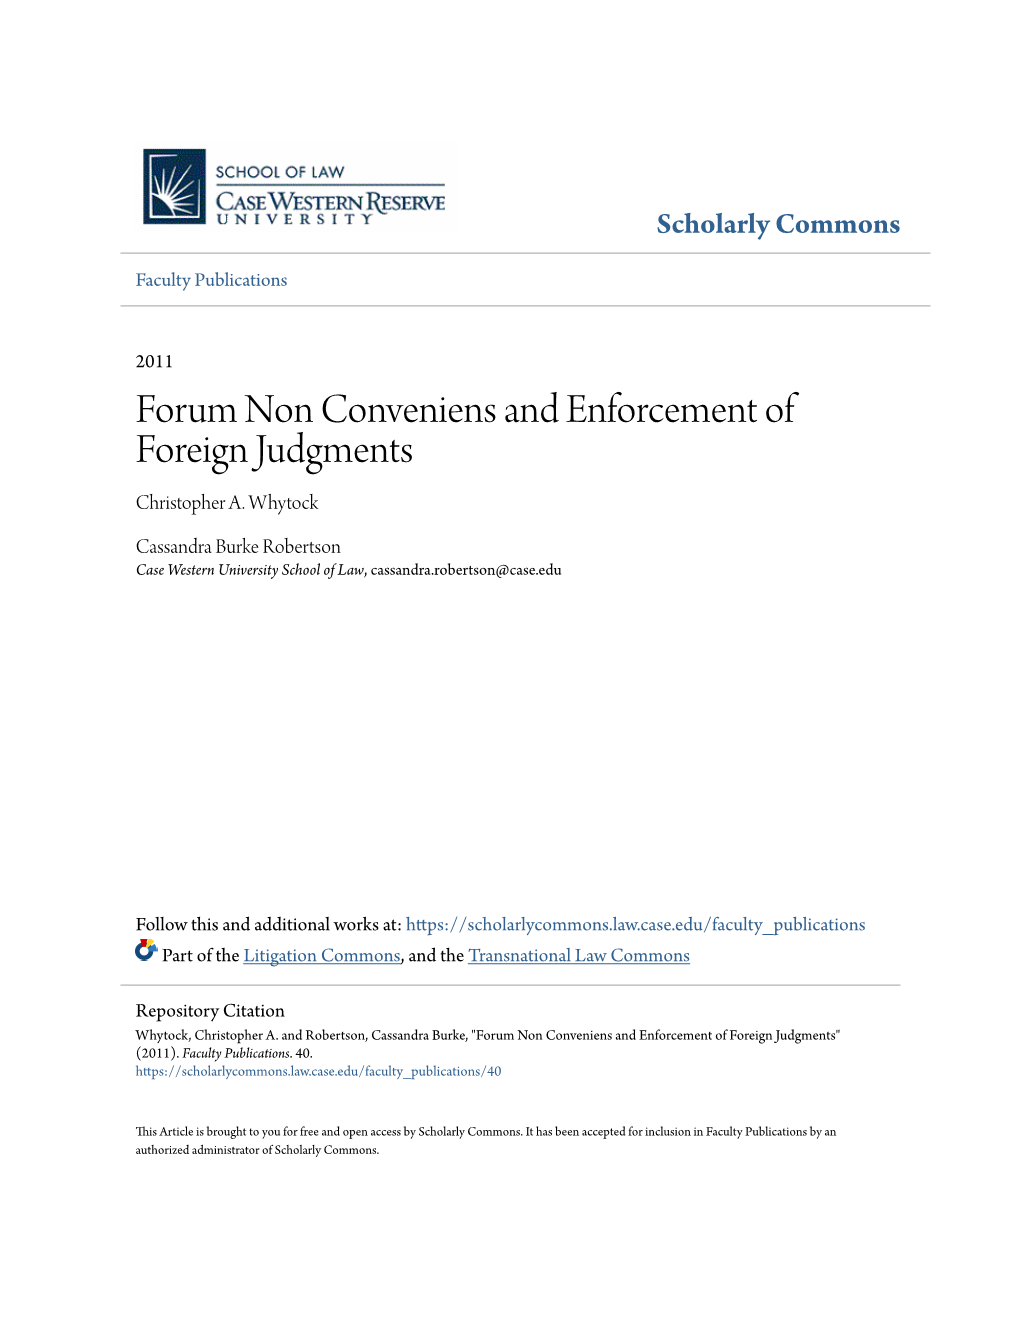 Forum Non Conveniens and Enforcement of Foreign Judgments Christopher A